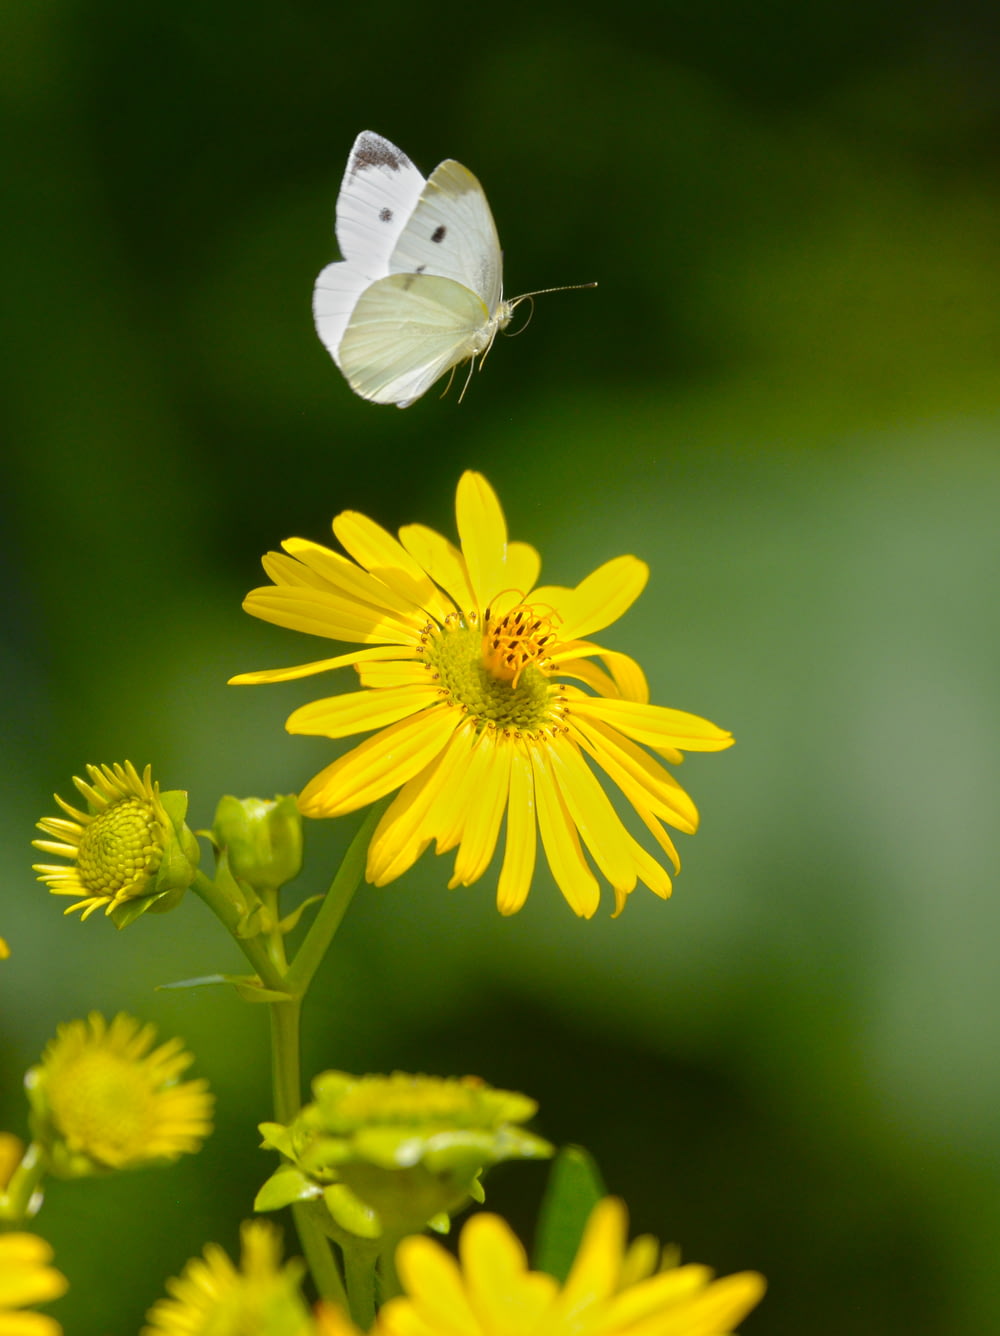 white butterfly perched on yellow flower in close up photography during daytime